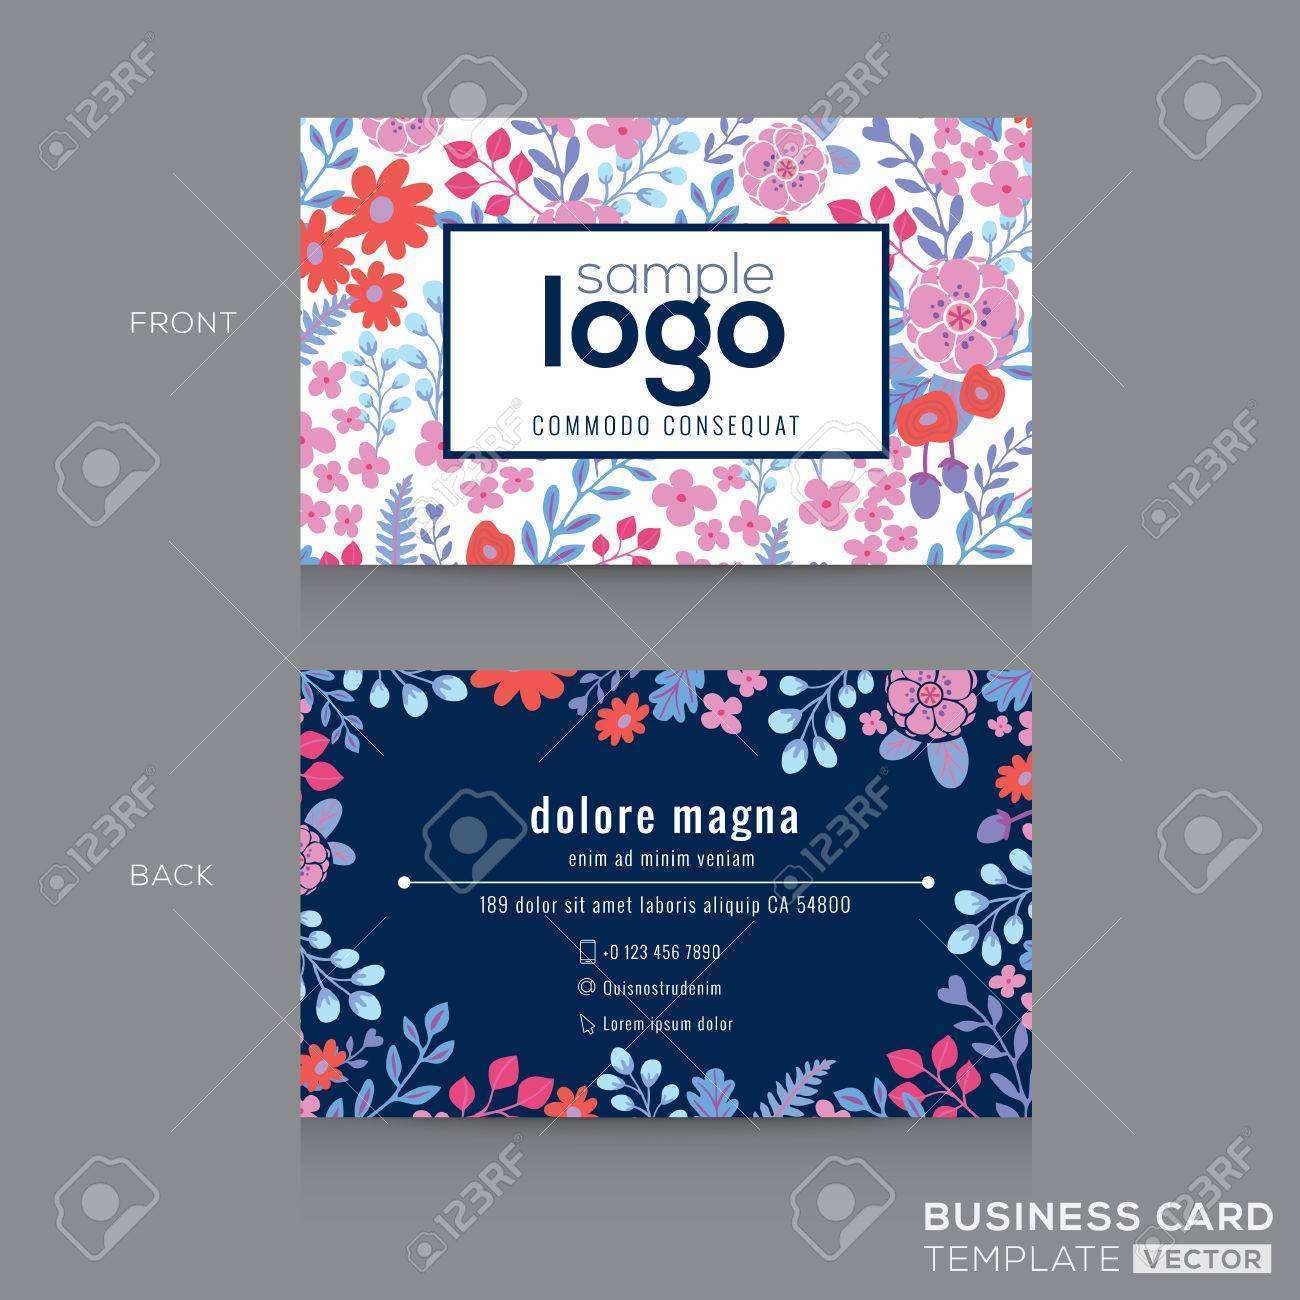 33-format-cute-name-card-template-in-photoshop-by-cute-name-card